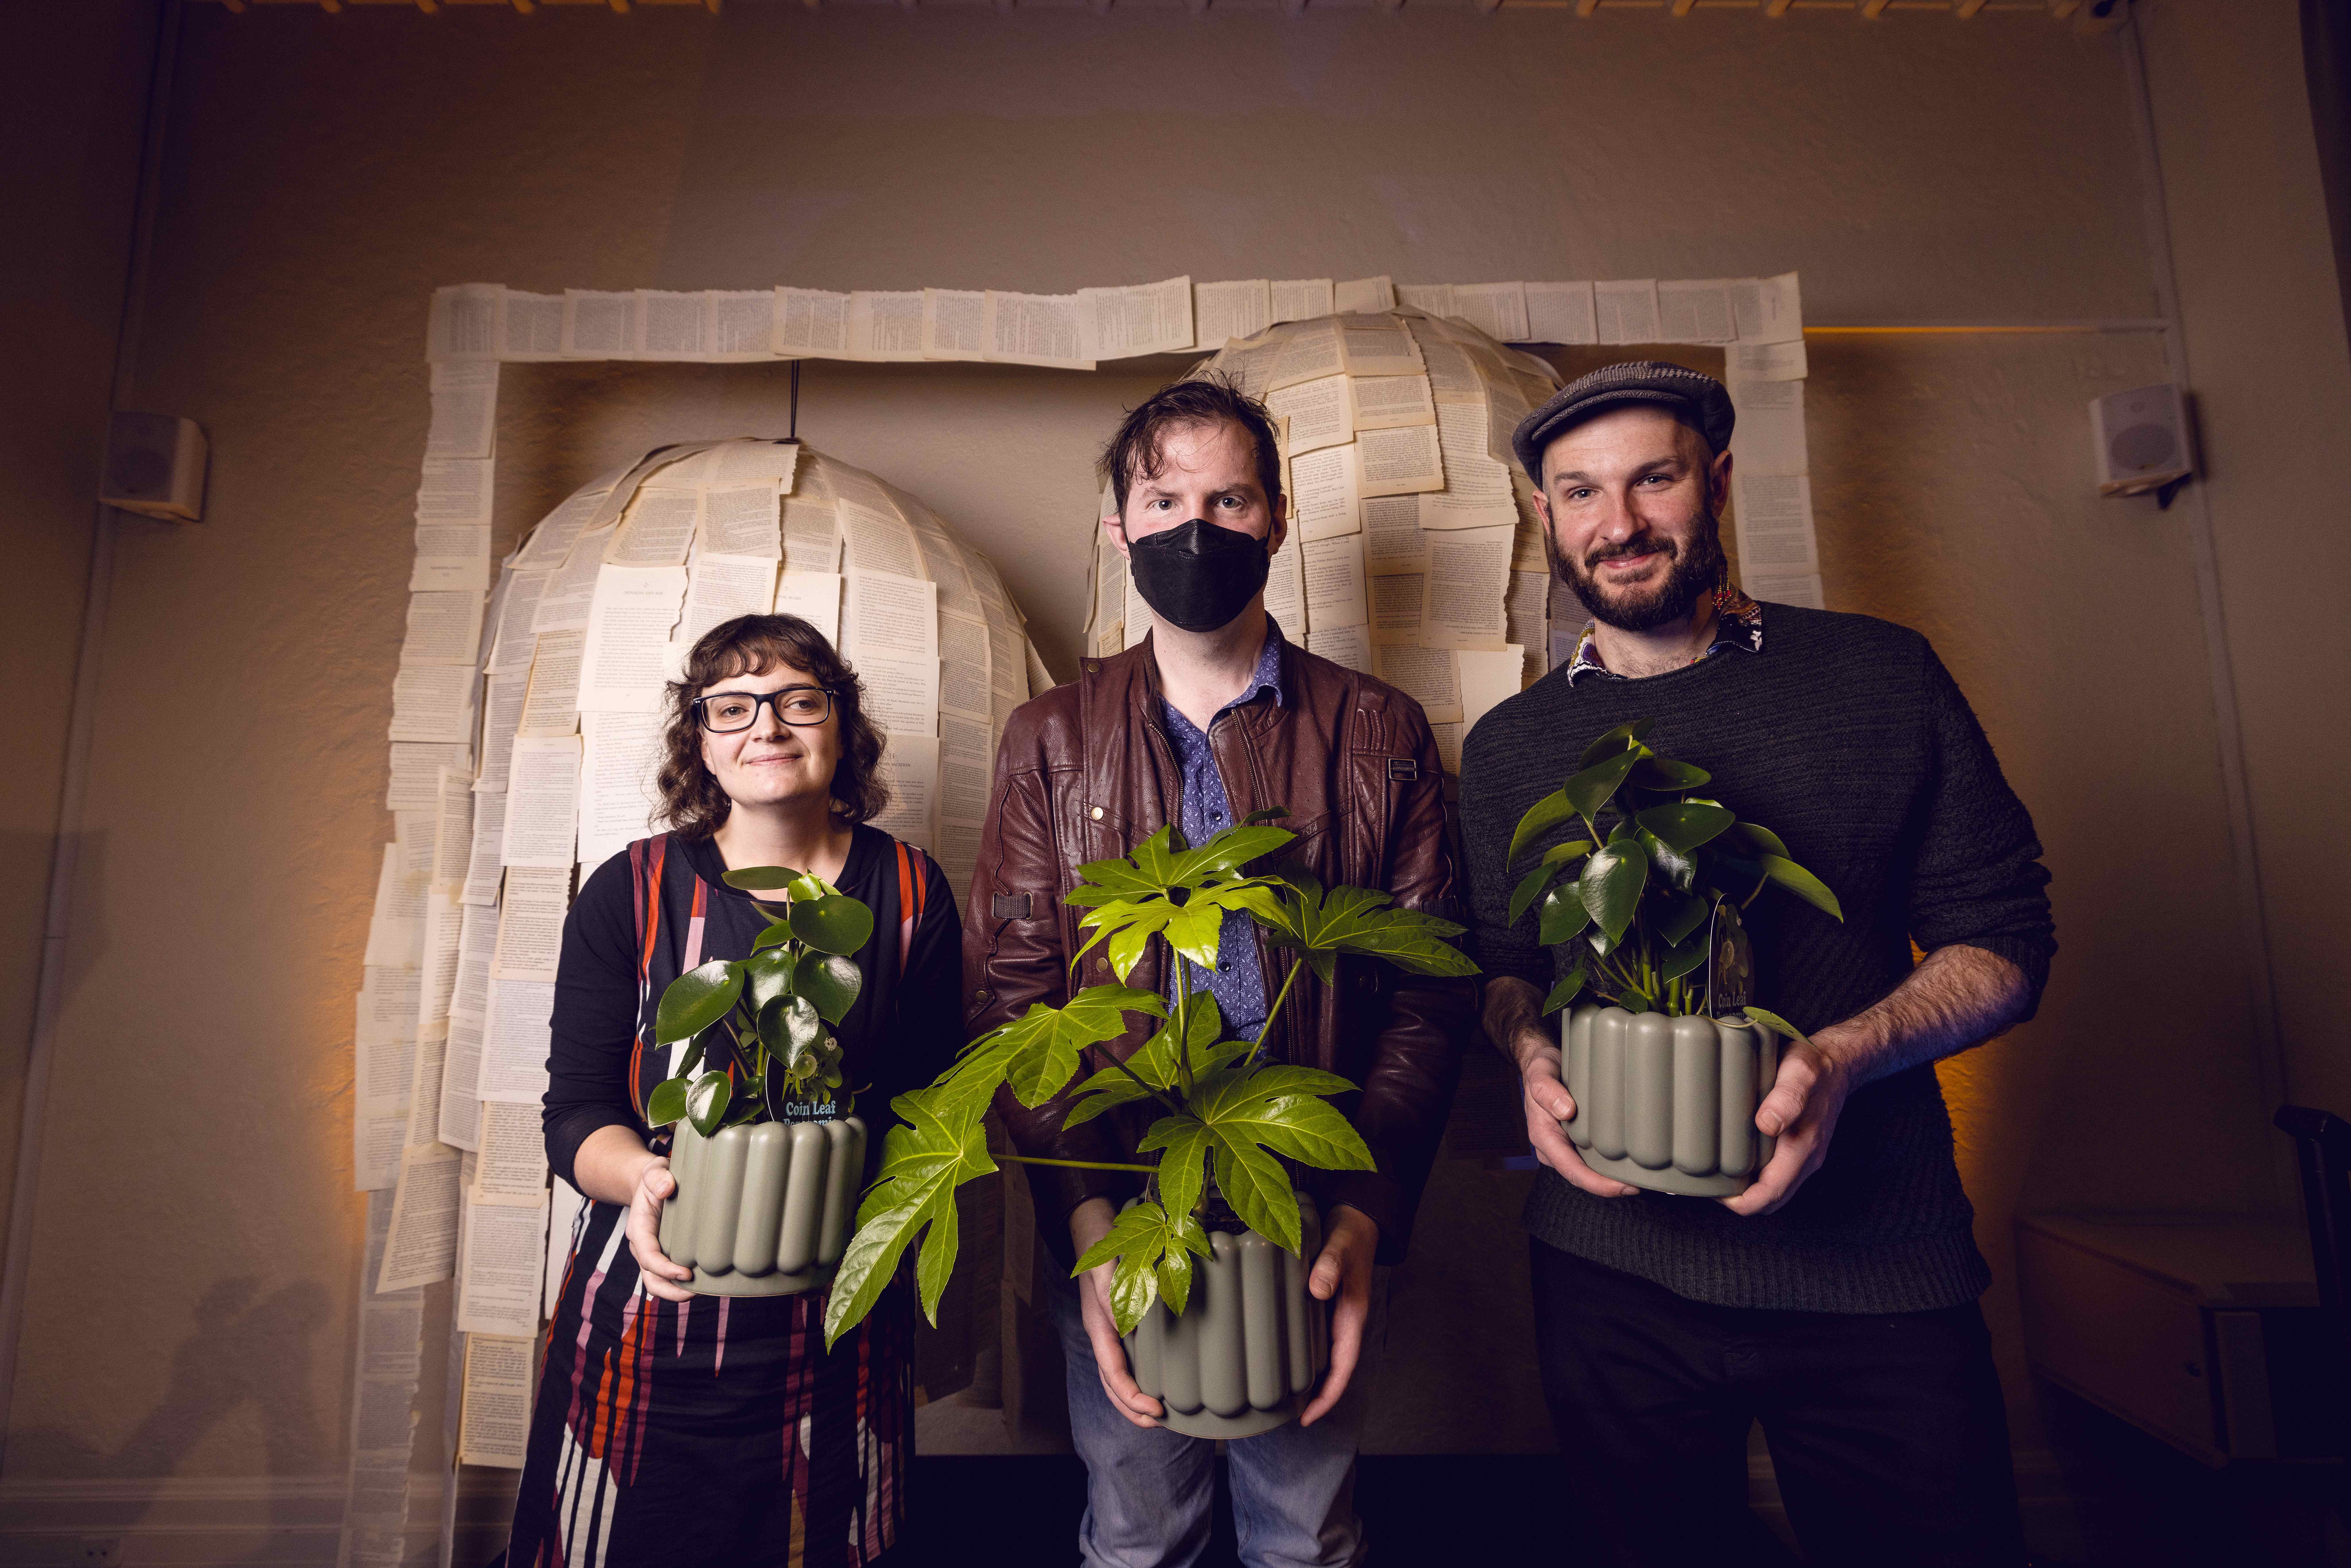 A woman wearing glasses and a long sleeve dark coloured dress, and two men: one wearing a balck mask over his mouth and the other wearing a brown golfer's hat, stand side by side in front a beige wall with a literary page structure. All three people are holding green plants in front of them.